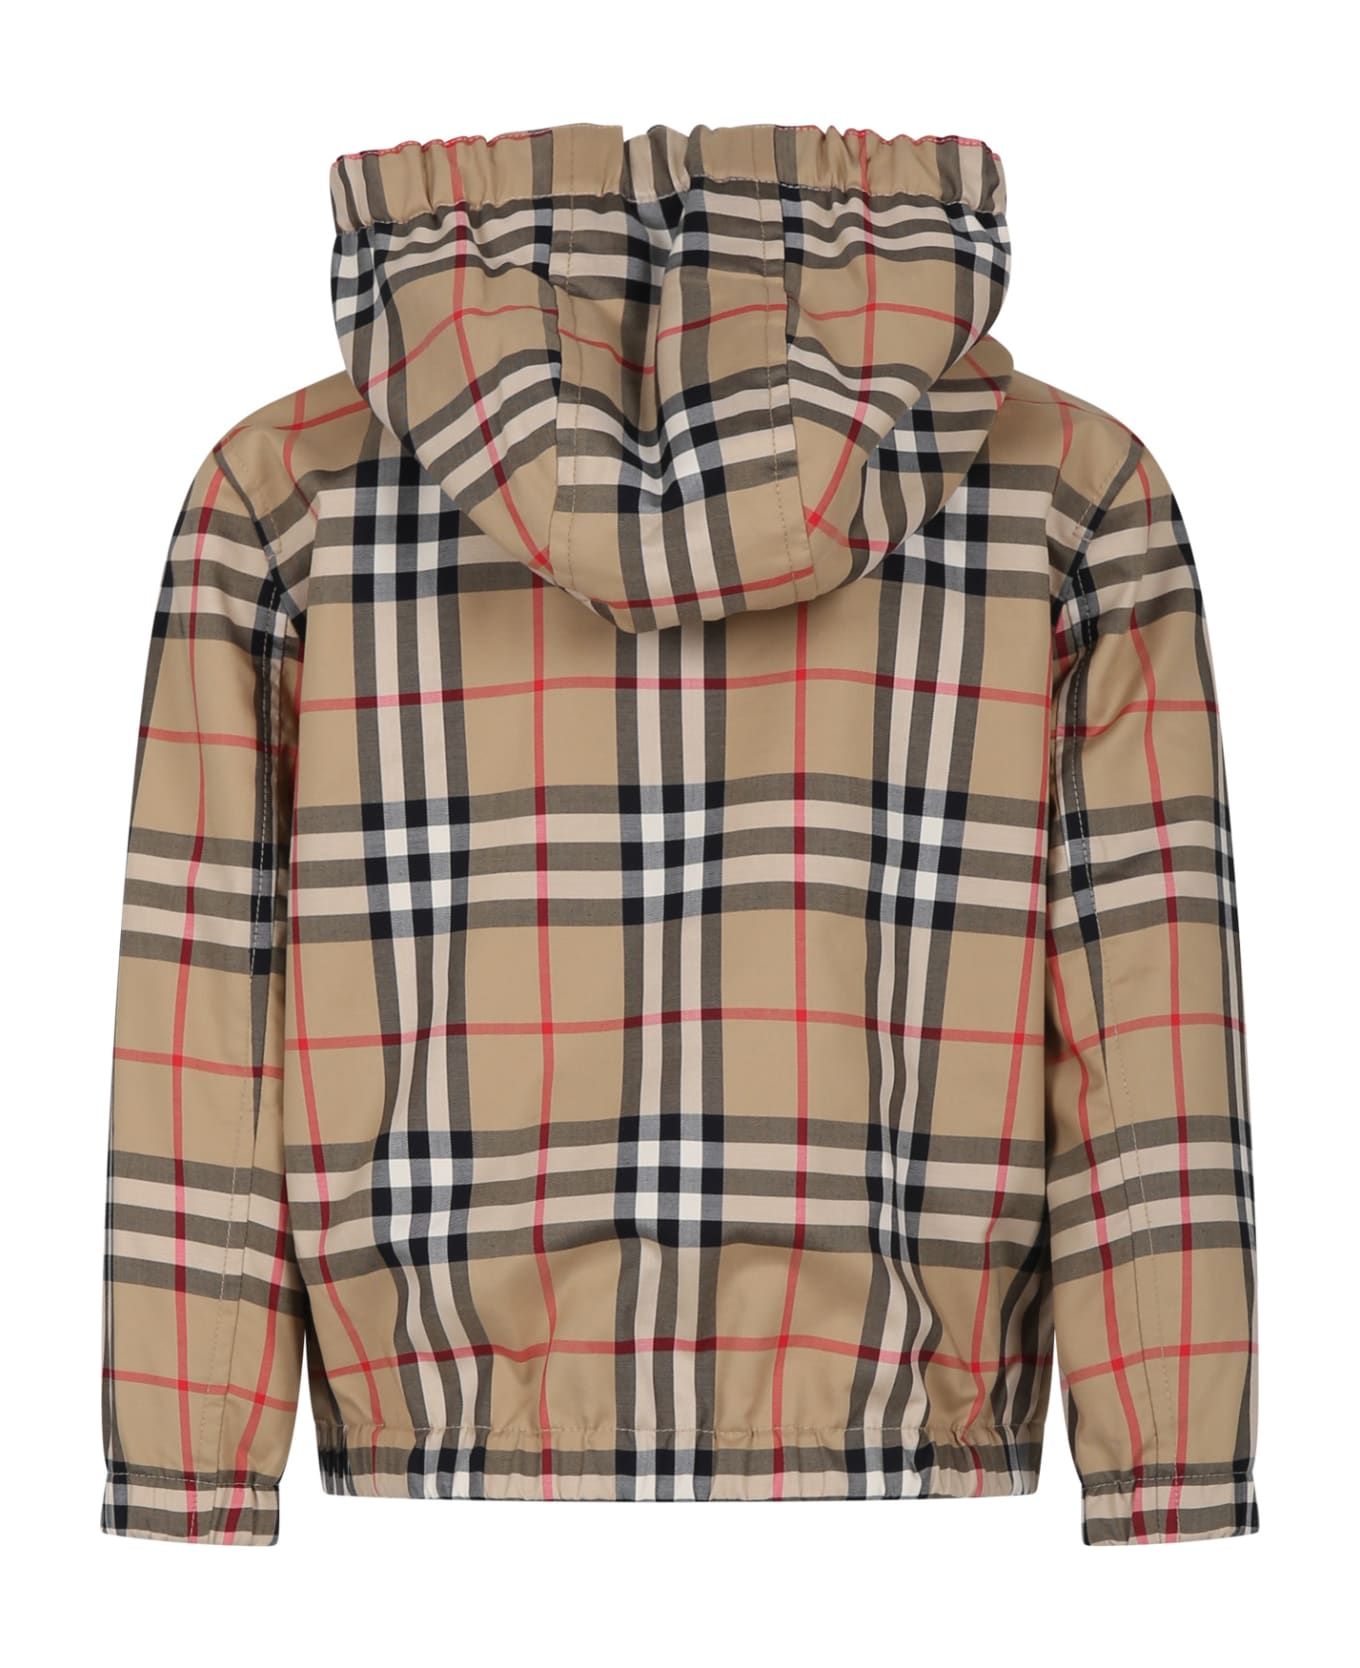 Burberry Beige Jacket For Boy With Iconic Vintage Check - Beige